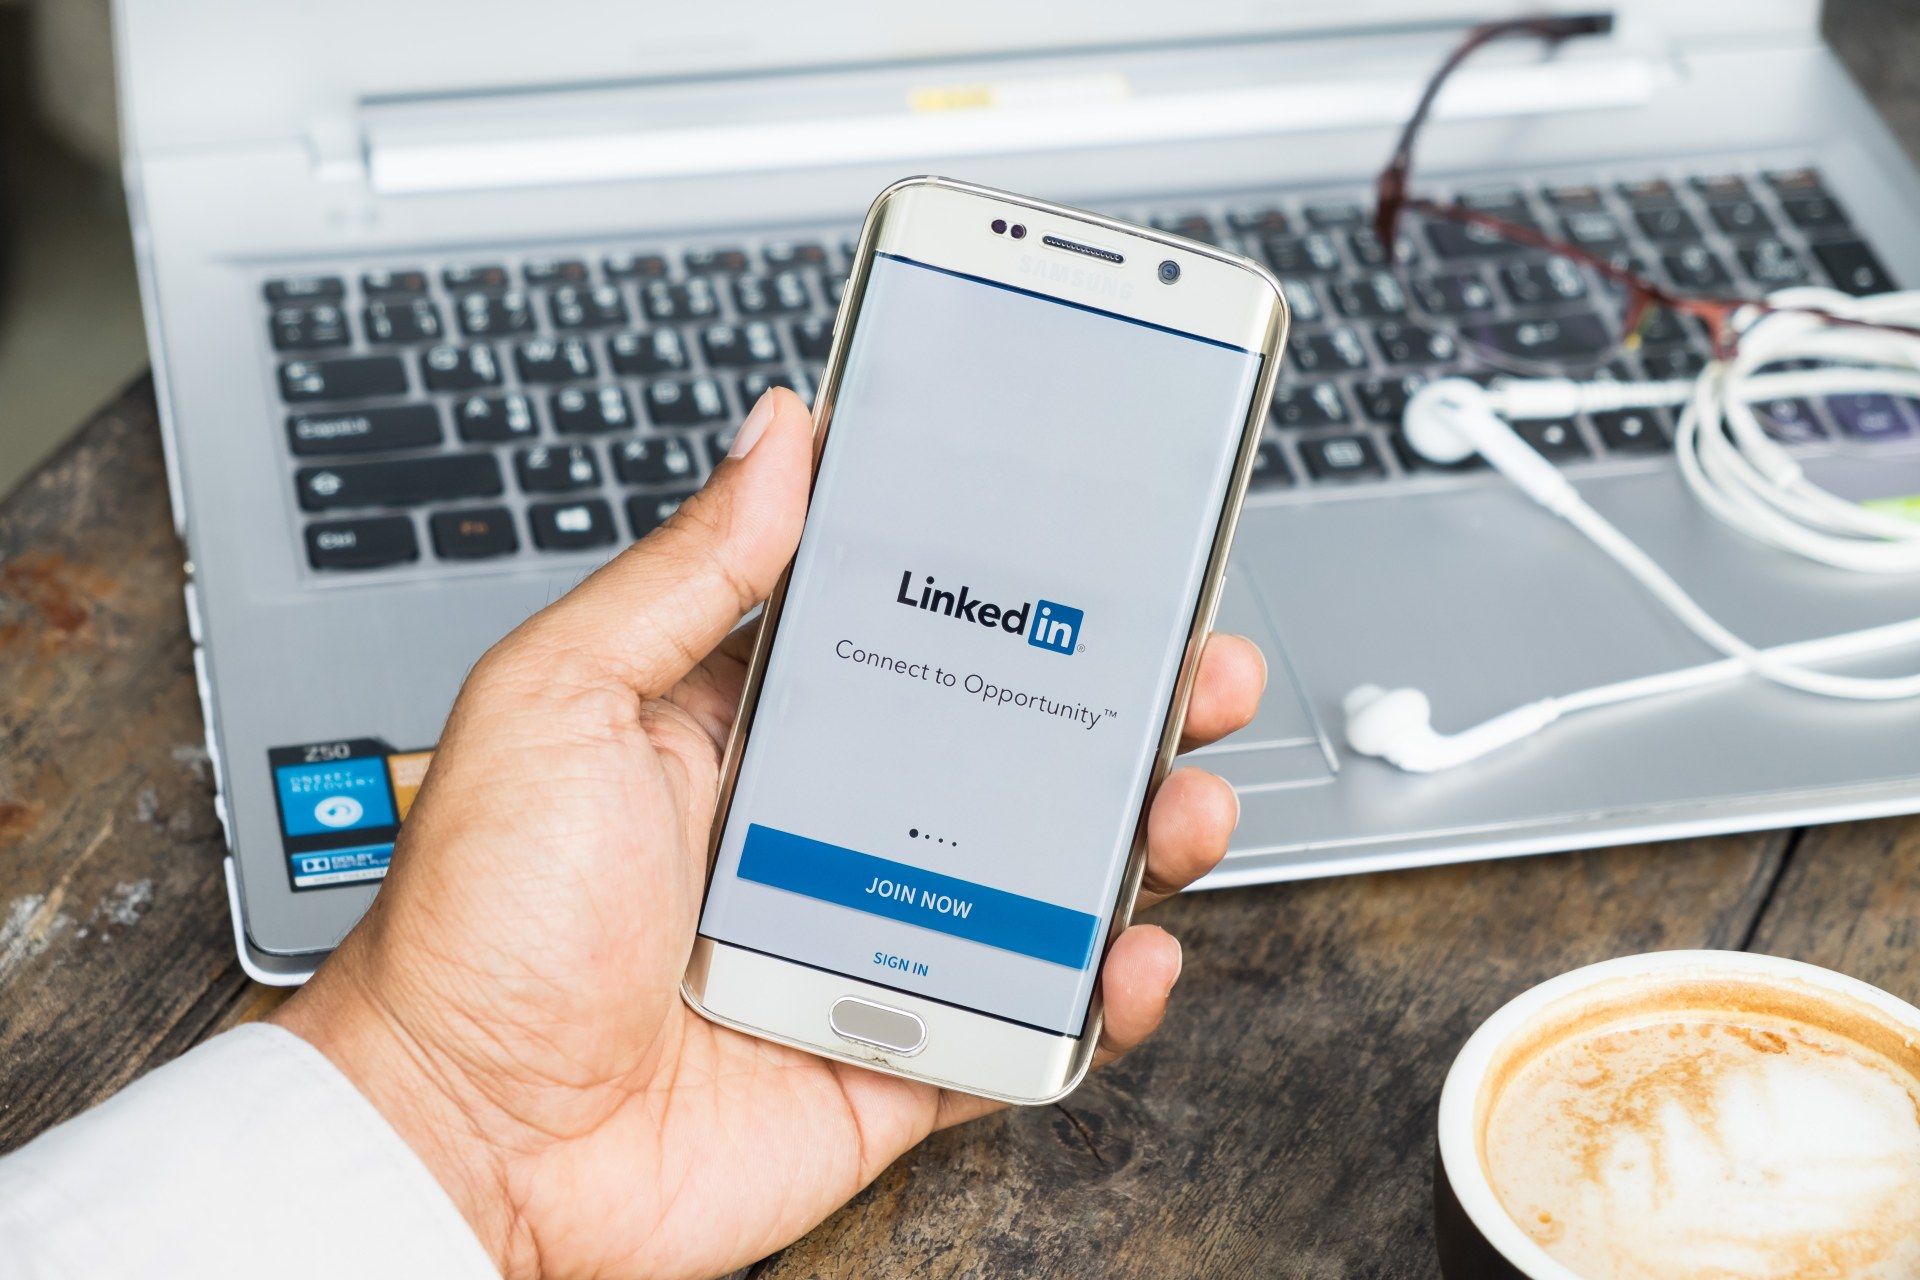 A man uses LinkedIn on his phone with his laptop sitting open in front of him - LinkedIn ads